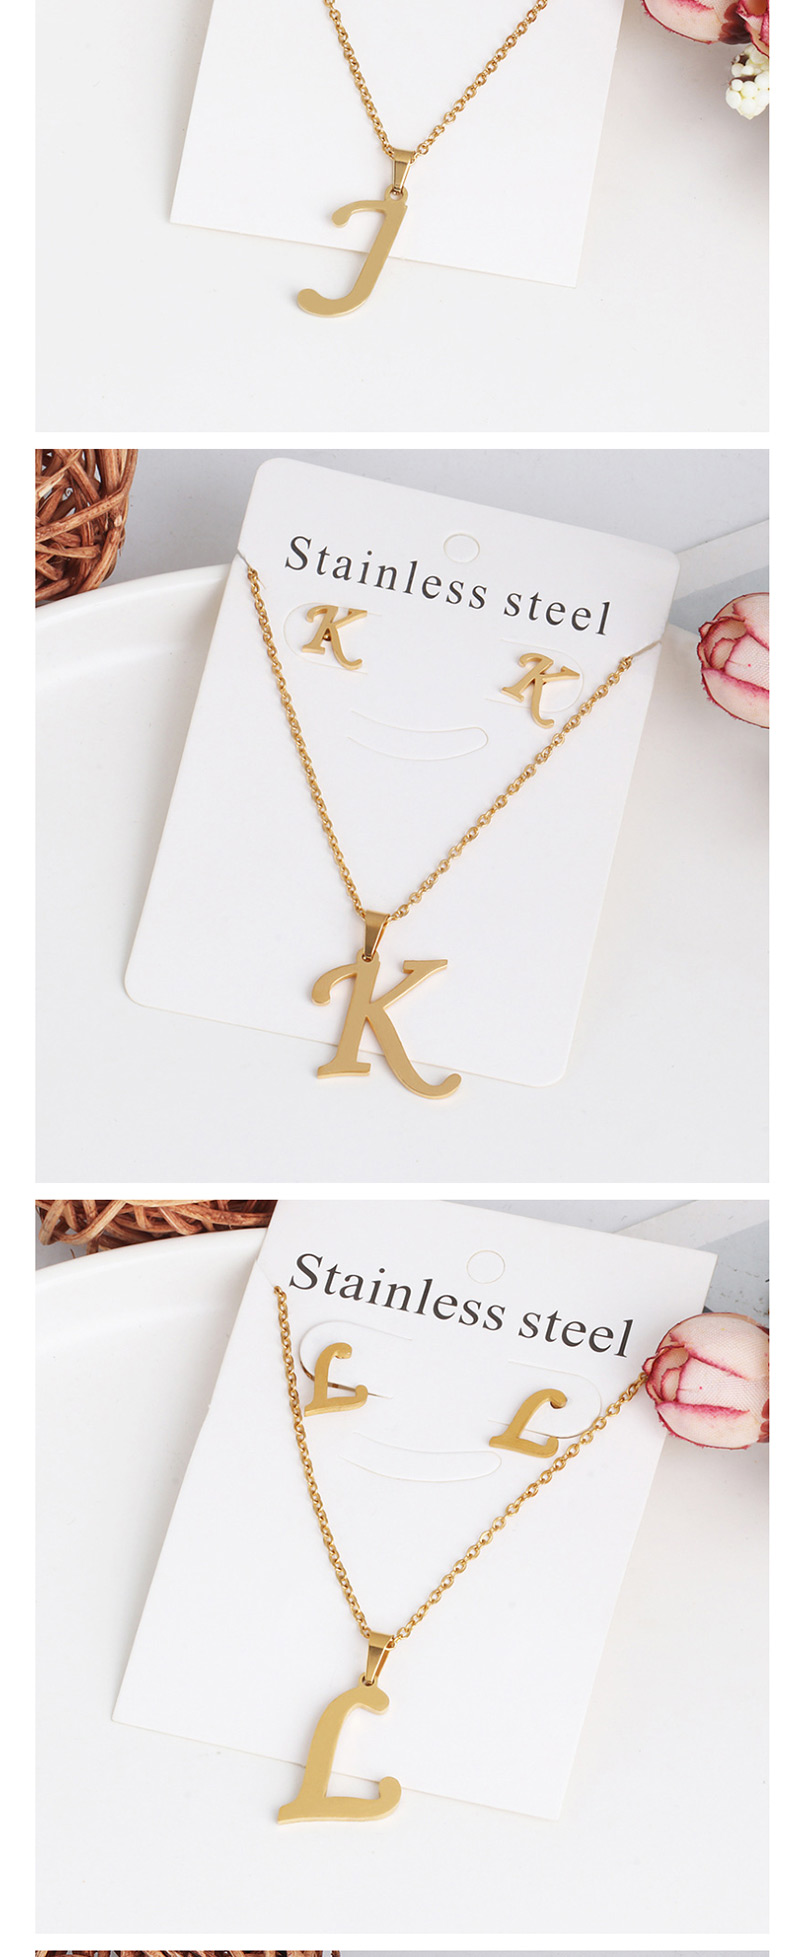 Fashion E Gold Stainless Steel Letter Necklace Earrings Two-piece,Jewelry Sets